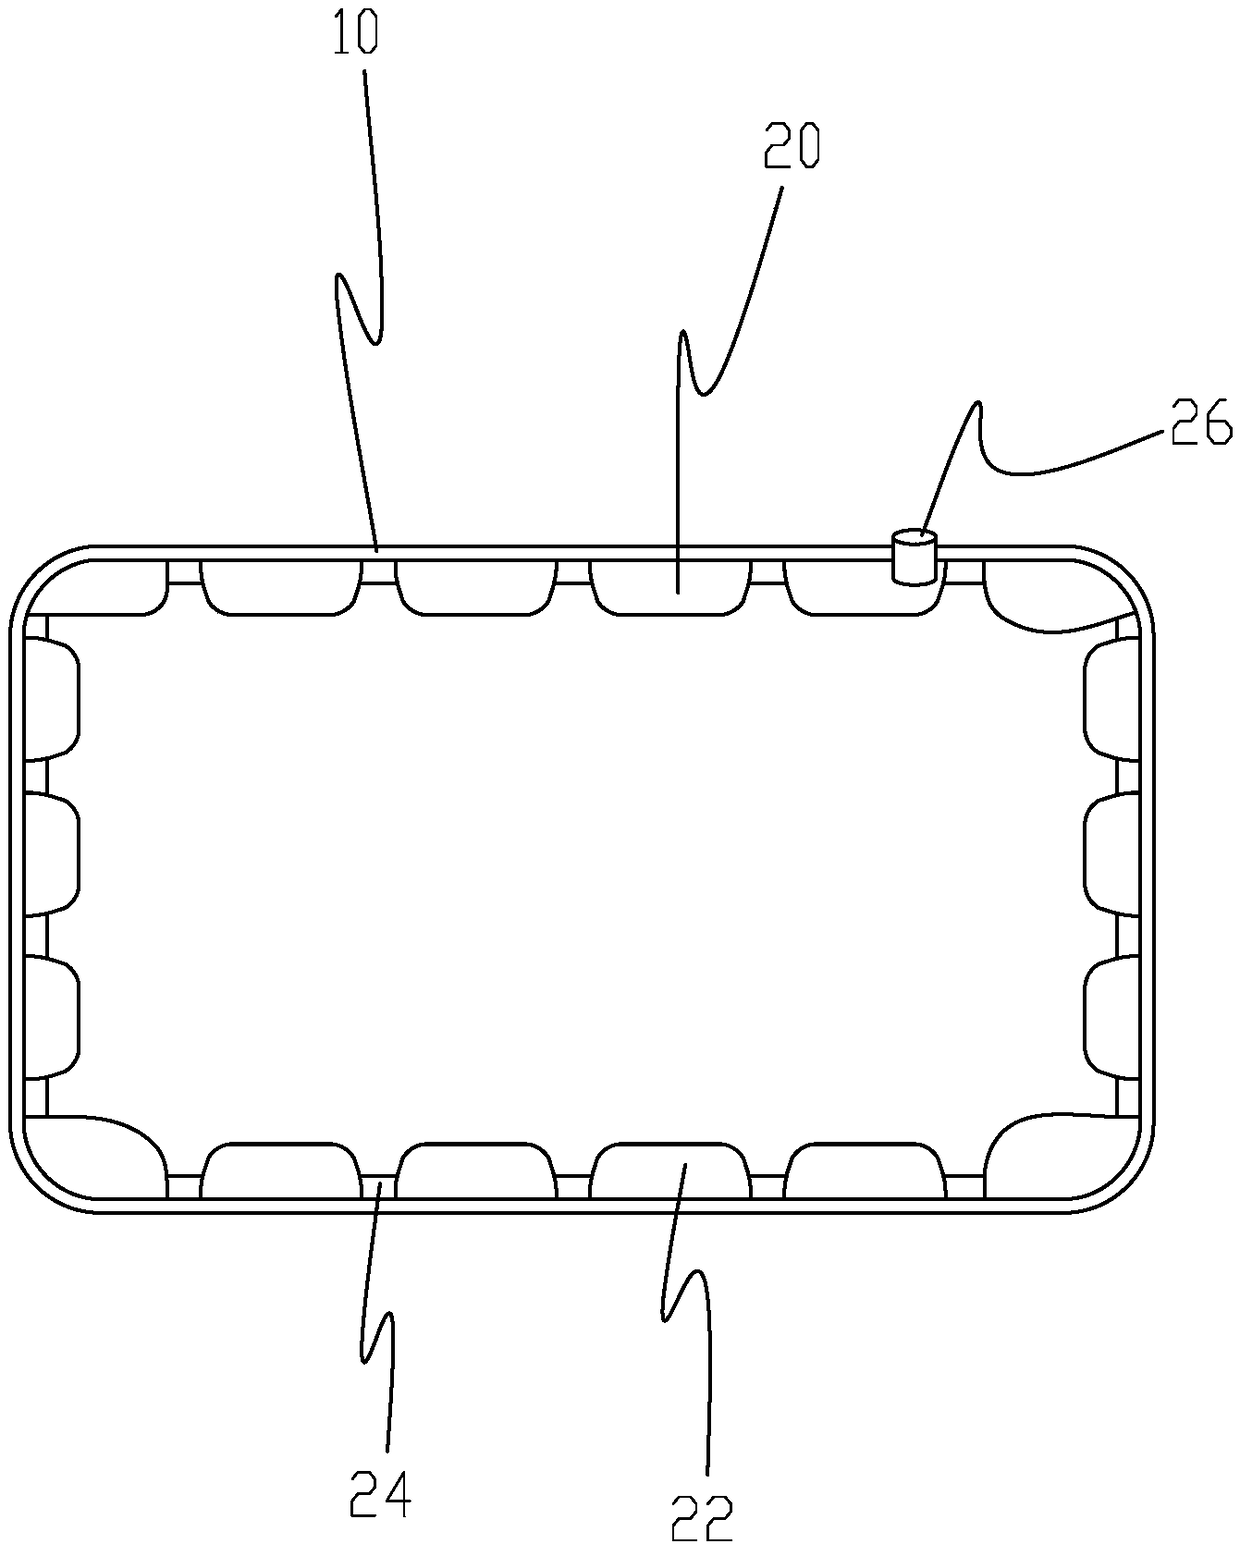 Packaging structure capable of being used repeatedly